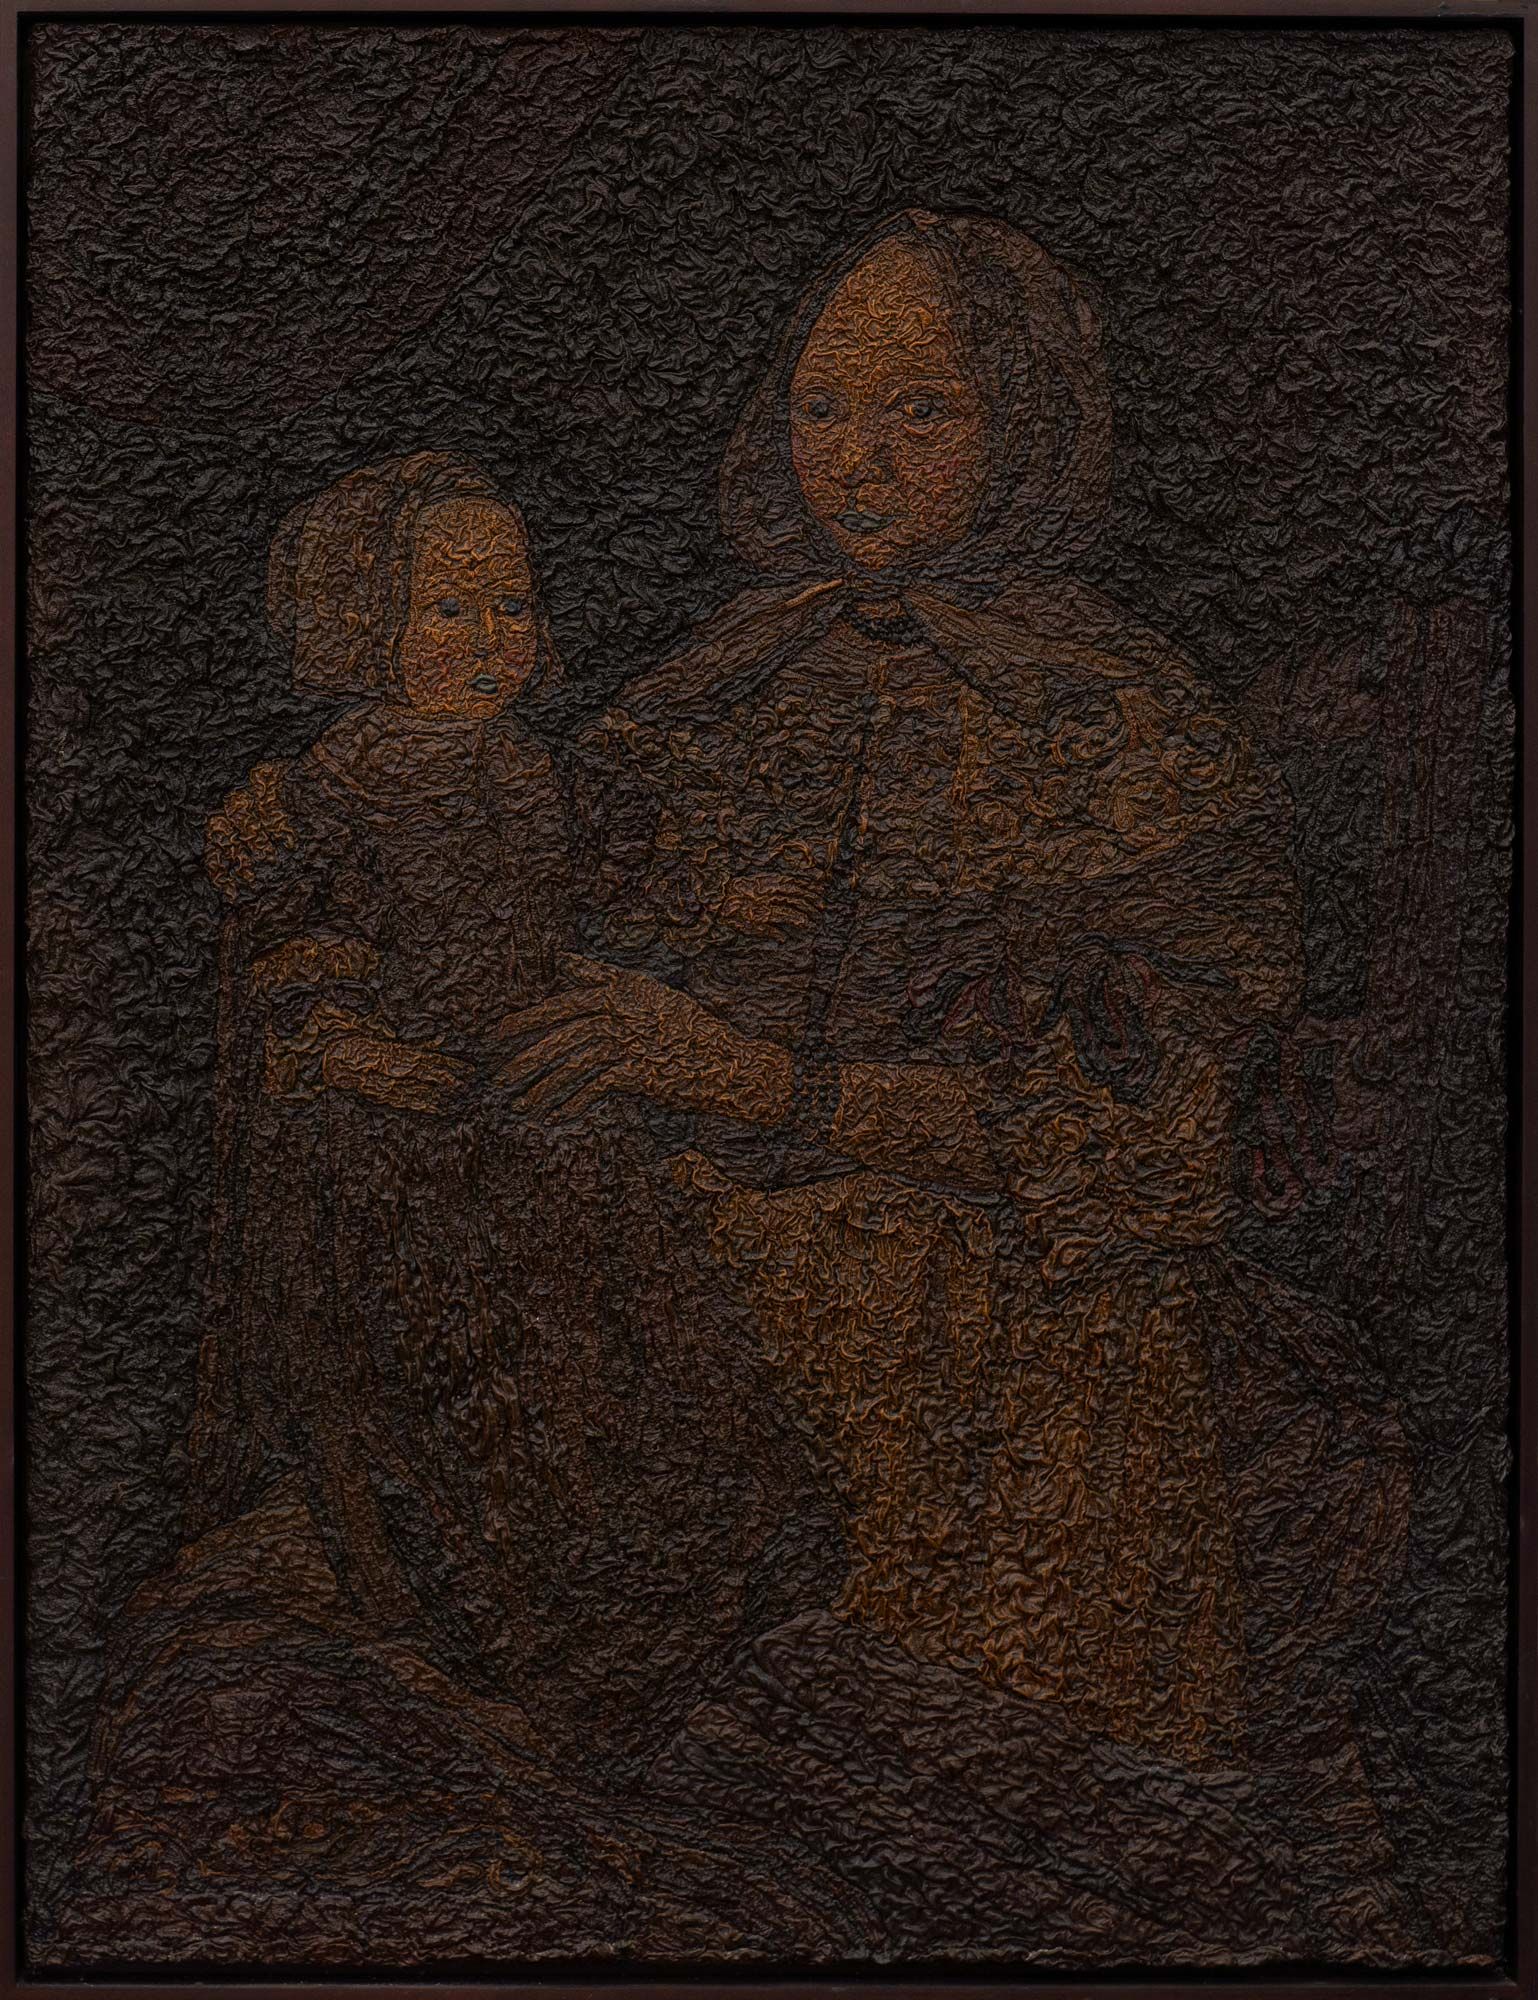 Painting of Mother and child , one of the first portraits of an American family to be painted , painted here in browns read and green in Alexander’s so called bog style , imitating the look of the ancient bog bodies found in Northern Europe 